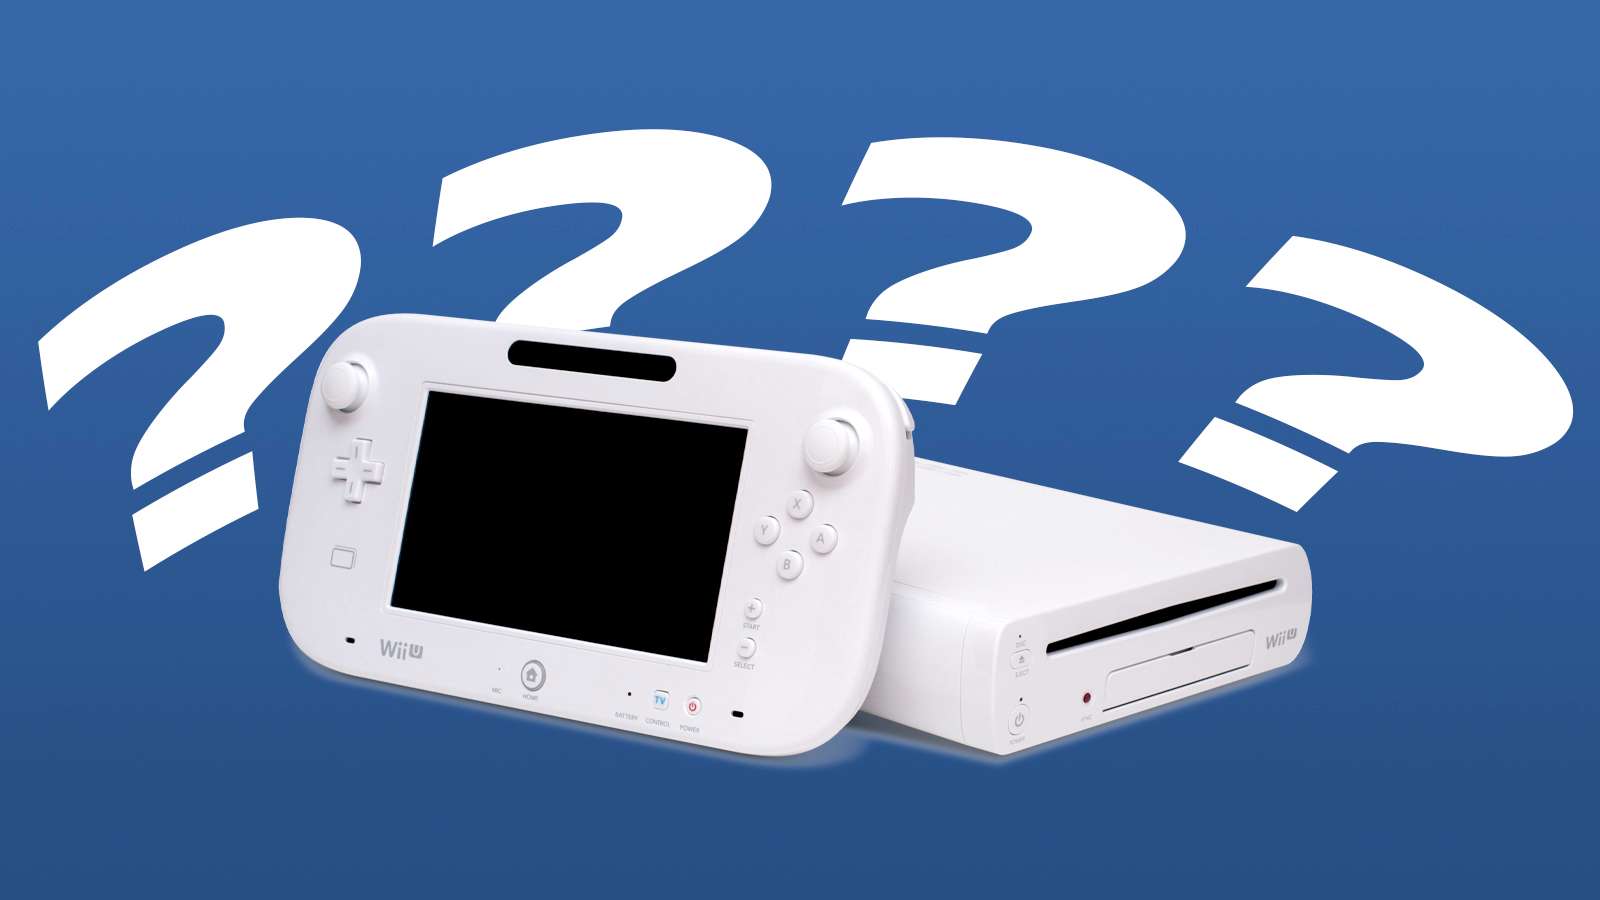 wii u with question marks behind it